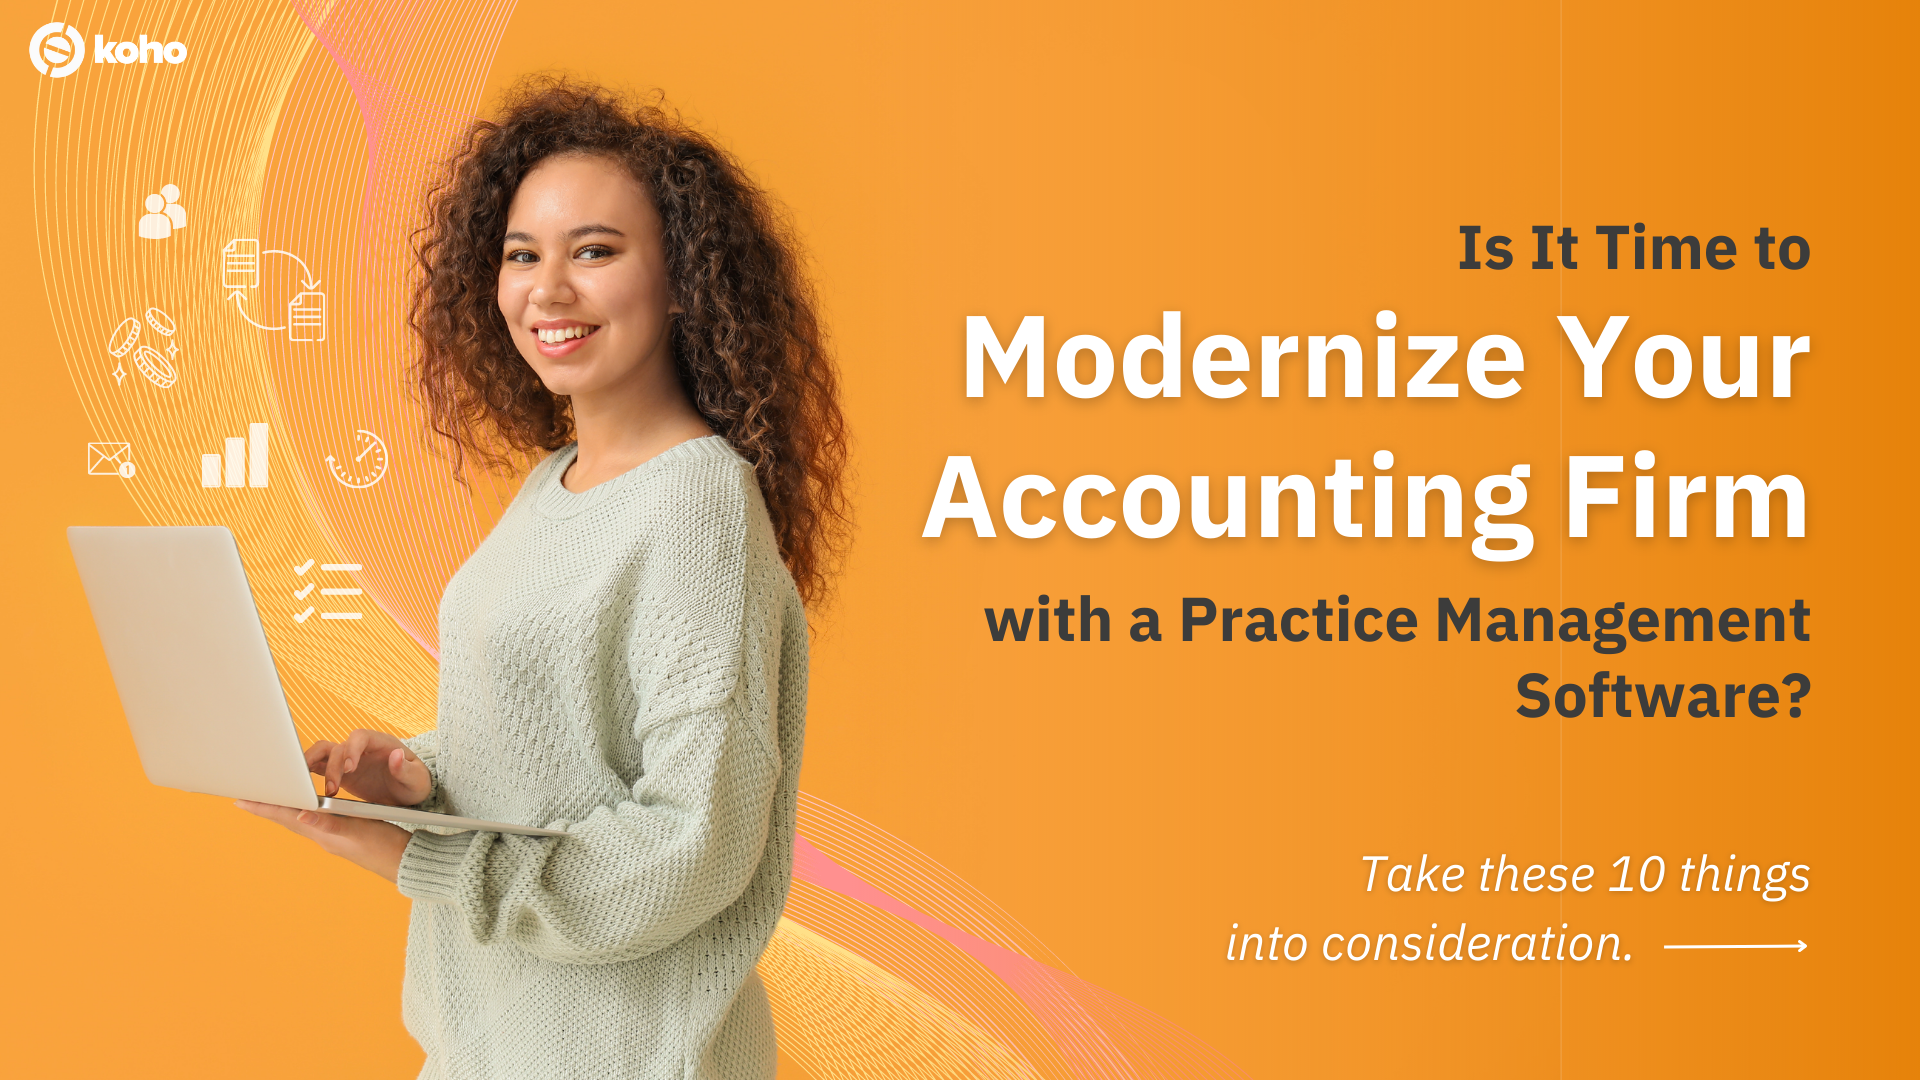 Time to Modernize Your Accounting Firm with a Practice Management Software